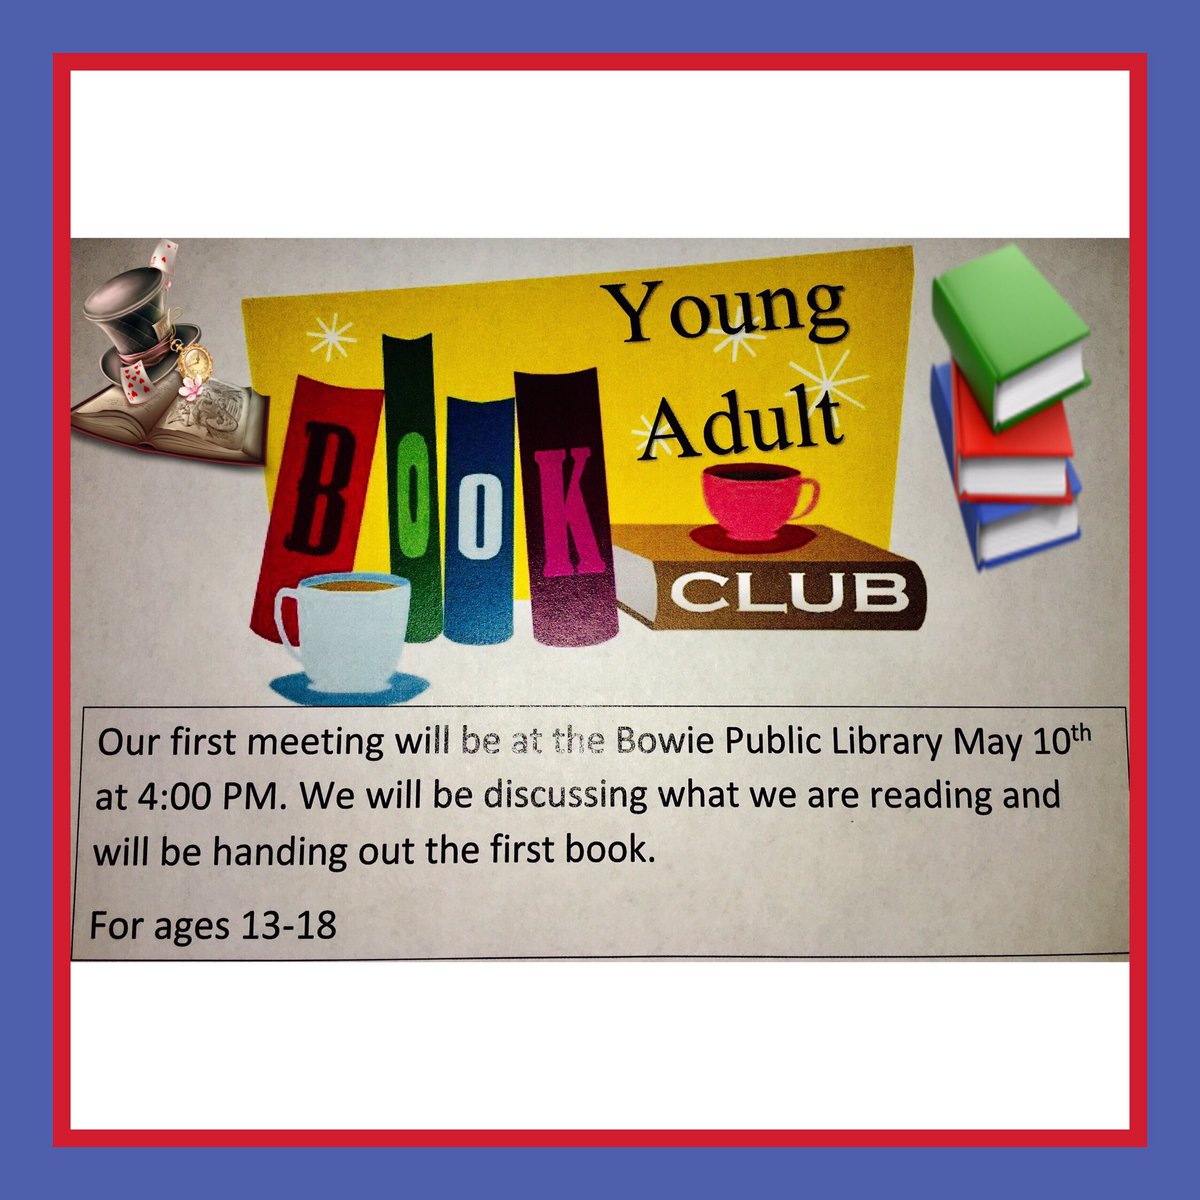 Exciting things are coming to the library! Be sure to share!
#bowietxlibrary #bowietx #youngadultbookclub